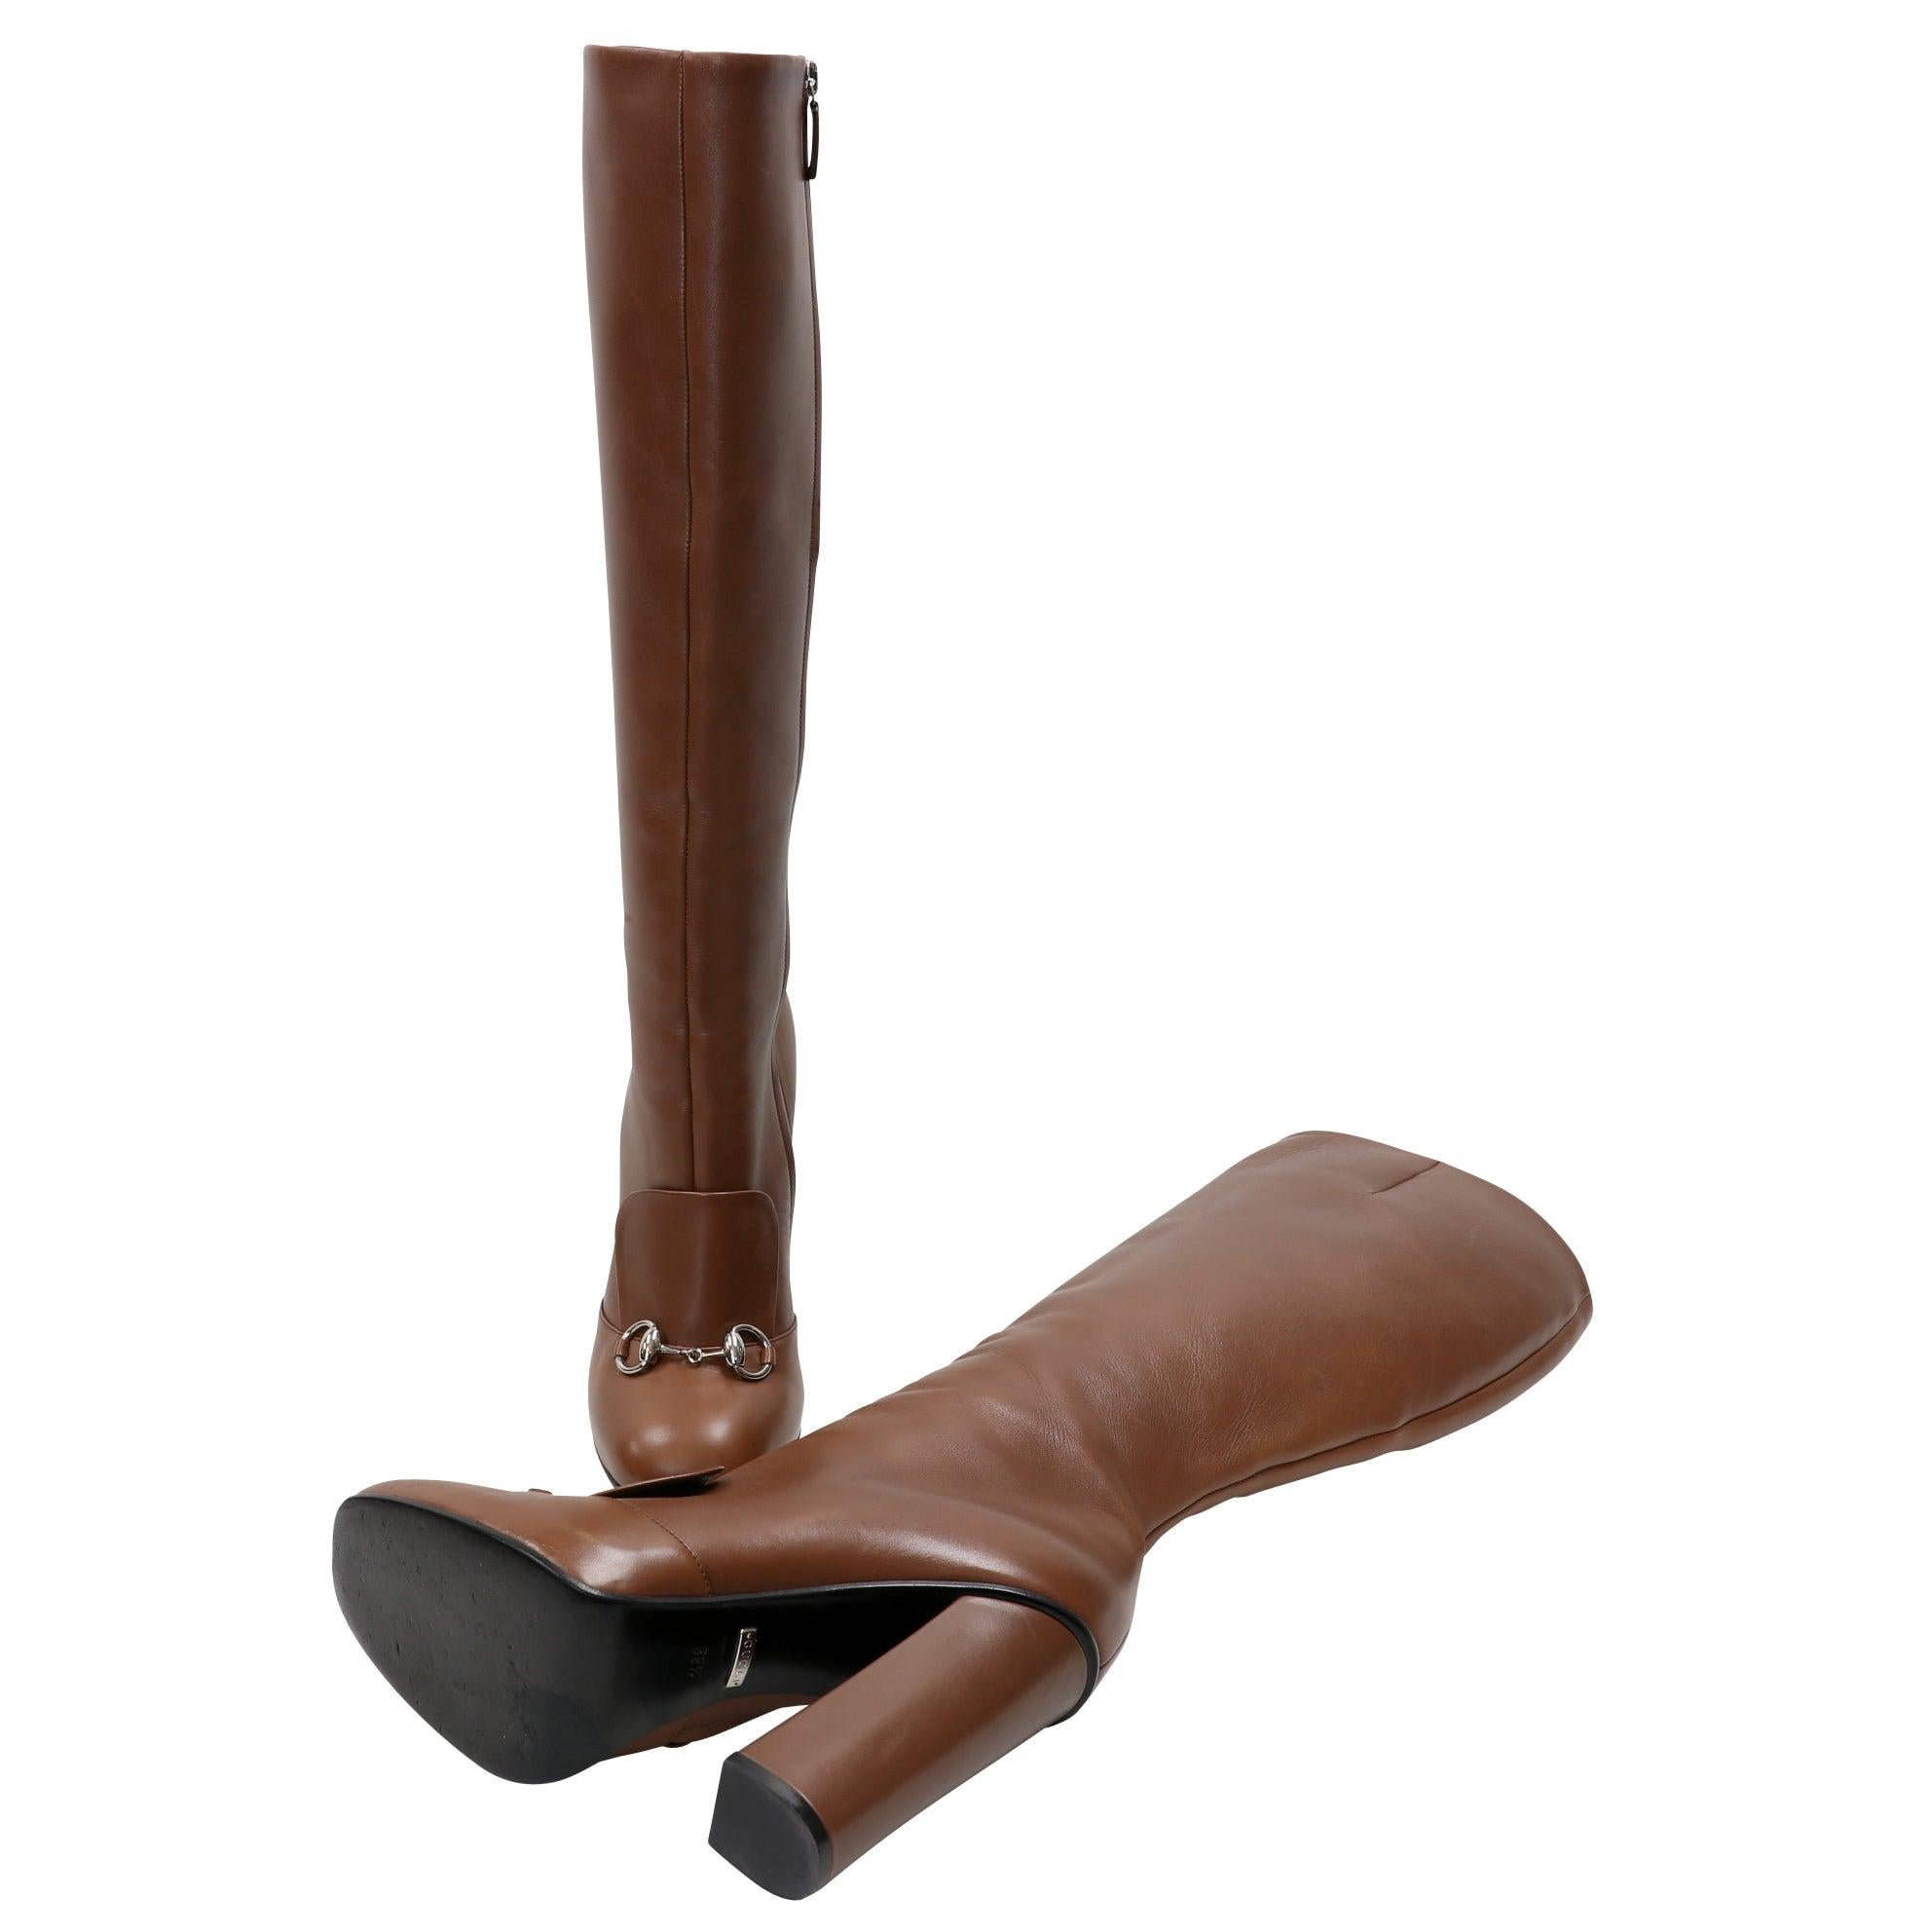 Gucci Brown Leather Horsebit Knee High Riding Boots 39.5 GG-S1111P-0001 For Sale 3